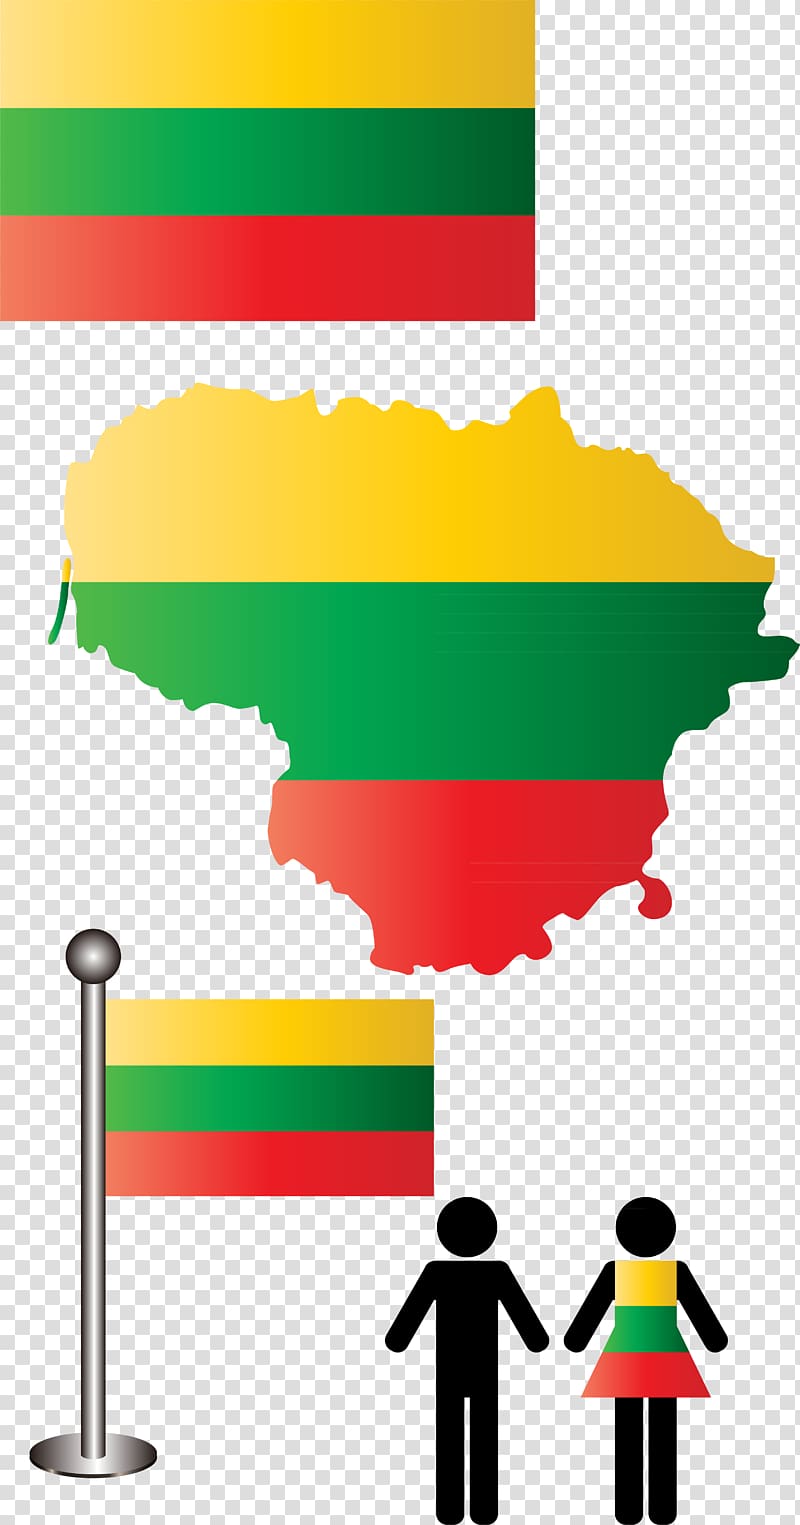 Flag of Lithuania Map, Lithuania flag element map transparent background PNG clipart